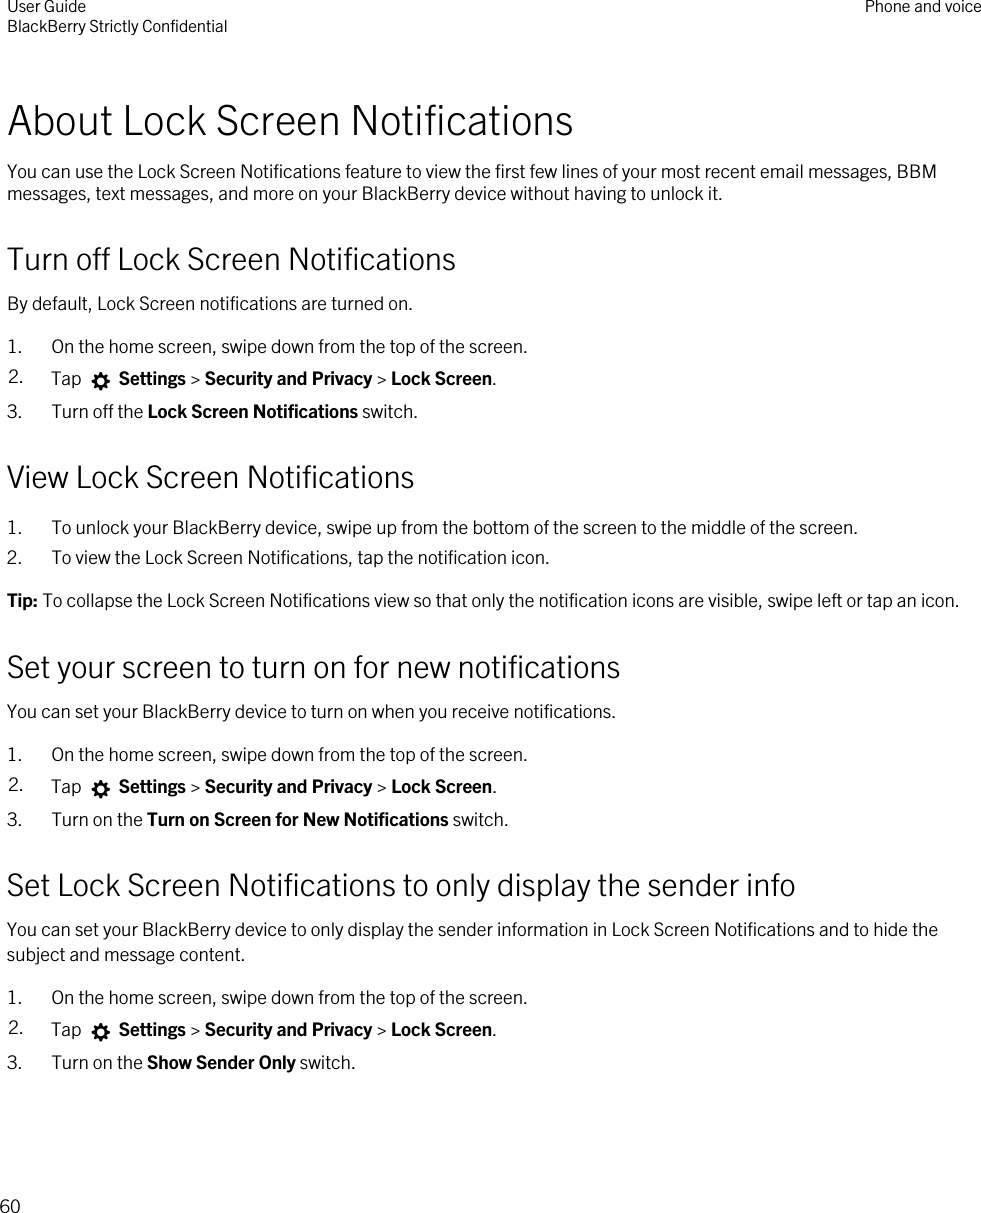 About Lock Screen NotificationsYou can use the Lock Screen Notifications feature to view the first few lines of your most recent email messages, BBM messages, text messages, and more on your BlackBerry device without having to unlock it.Turn off Lock Screen NotificationsBy default, Lock Screen notifications are turned on.1. On the home screen, swipe down from the top of the screen.2. Tap   Settings &gt; Security and Privacy &gt; Lock Screen.3. Turn off the Lock Screen Notifications switch.View Lock Screen Notifications1. To unlock your BlackBerry device, swipe up from the bottom of the screen to the middle of the screen.2. To view the Lock Screen Notifications, tap the notification icon.Tip: To collapse the Lock Screen Notifications view so that only the notification icons are visible, swipe left or tap an icon.Set your screen to turn on for new notificationsYou can set your BlackBerry device to turn on when you receive notifications.1. On the home screen, swipe down from the top of the screen.2. Tap   Settings &gt; Security and Privacy &gt; Lock Screen. 3. Turn on the Turn on Screen for New Notifications switch.Set Lock Screen Notifications to only display the sender infoYou can set your BlackBerry device to only display the sender information in Lock Screen Notifications and to hide the subject and message content.1. On the home screen, swipe down from the top of the screen.2. Tap   Settings &gt; Security and Privacy &gt; Lock Screen.3. Turn on the Show Sender Only switch.User GuideBlackBerry Strictly Confidential Phone and voice60